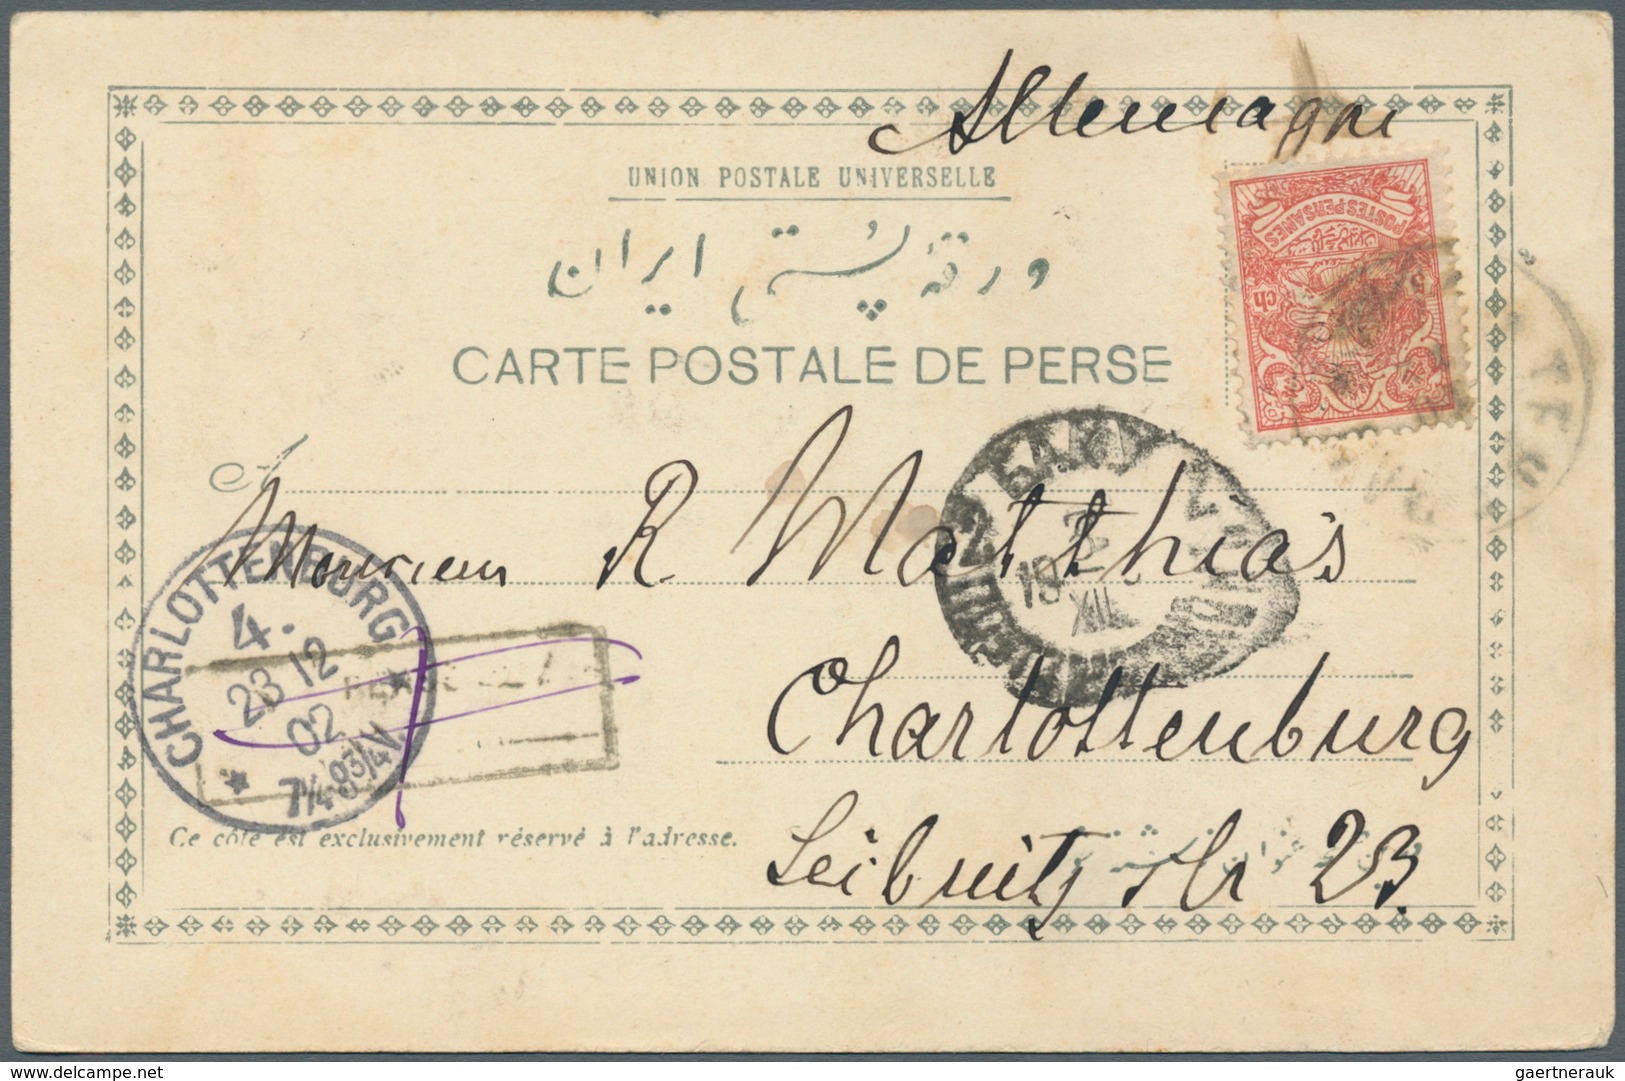 22813 Iran: 1891/1908, group of nine entires (covers, ppc and used stationeries with comprehensive message